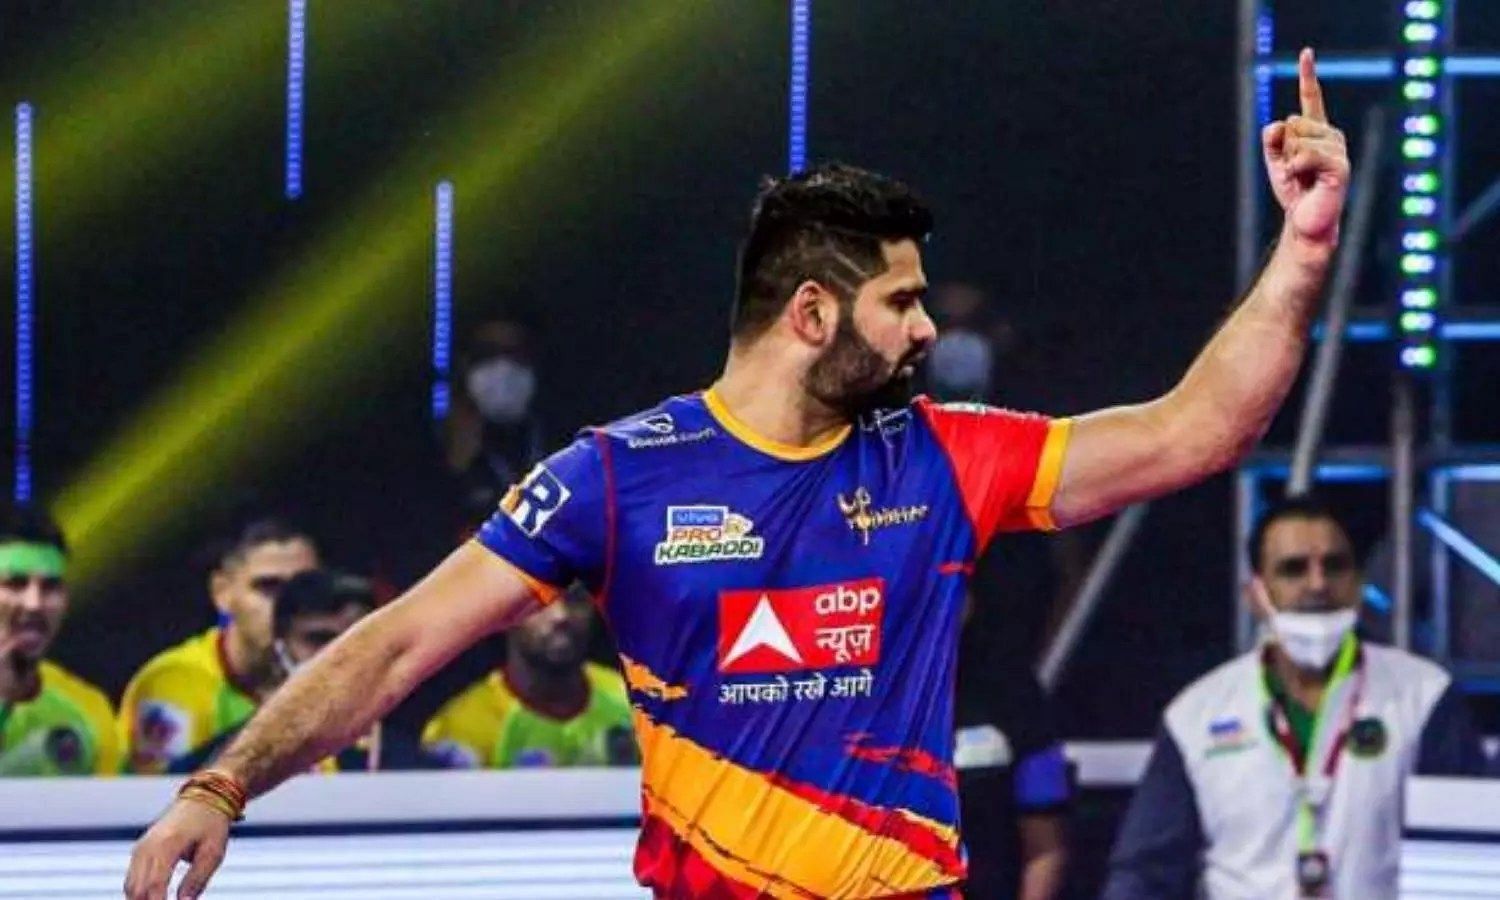 UP Yoddha used their FBM card to retain Pardeep Narwal for ₹90 lakh